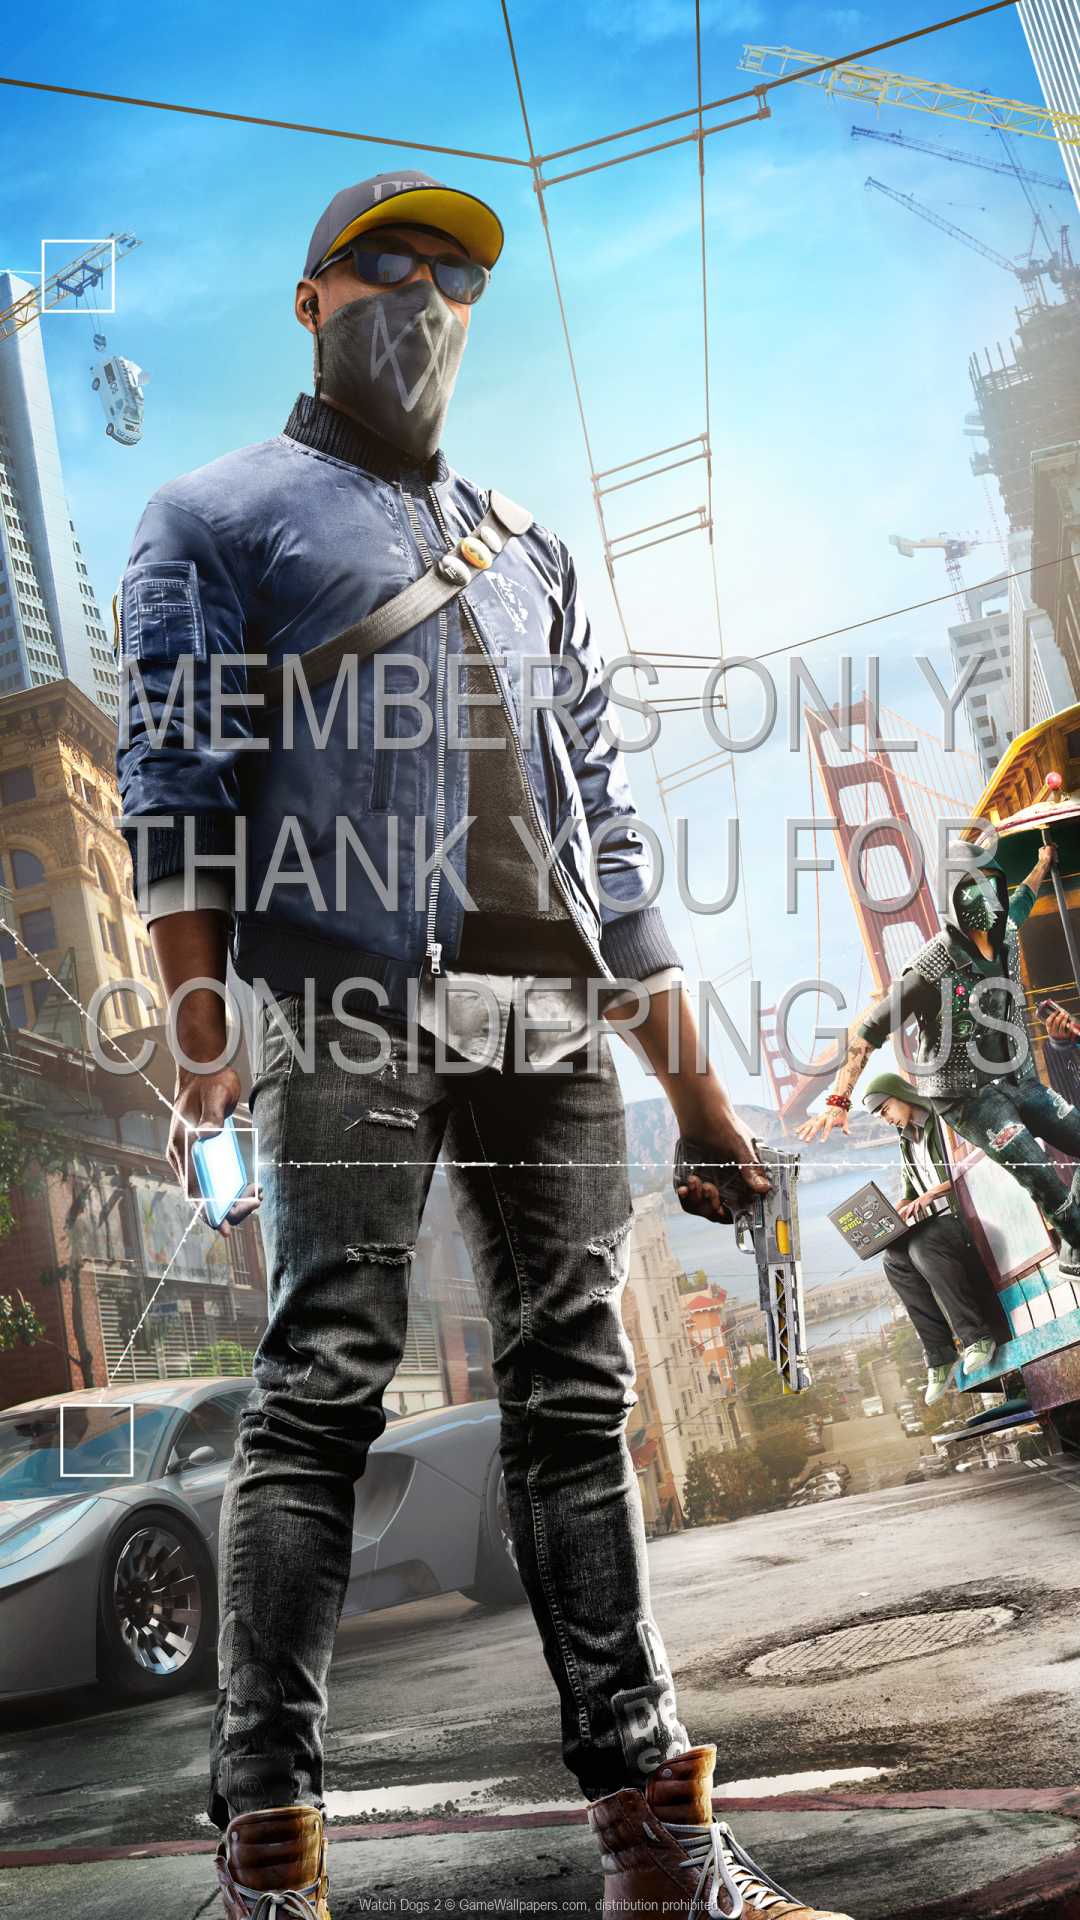 Watch Dogs 2 1080p%20Vertical Mobile wallpaper or background 04